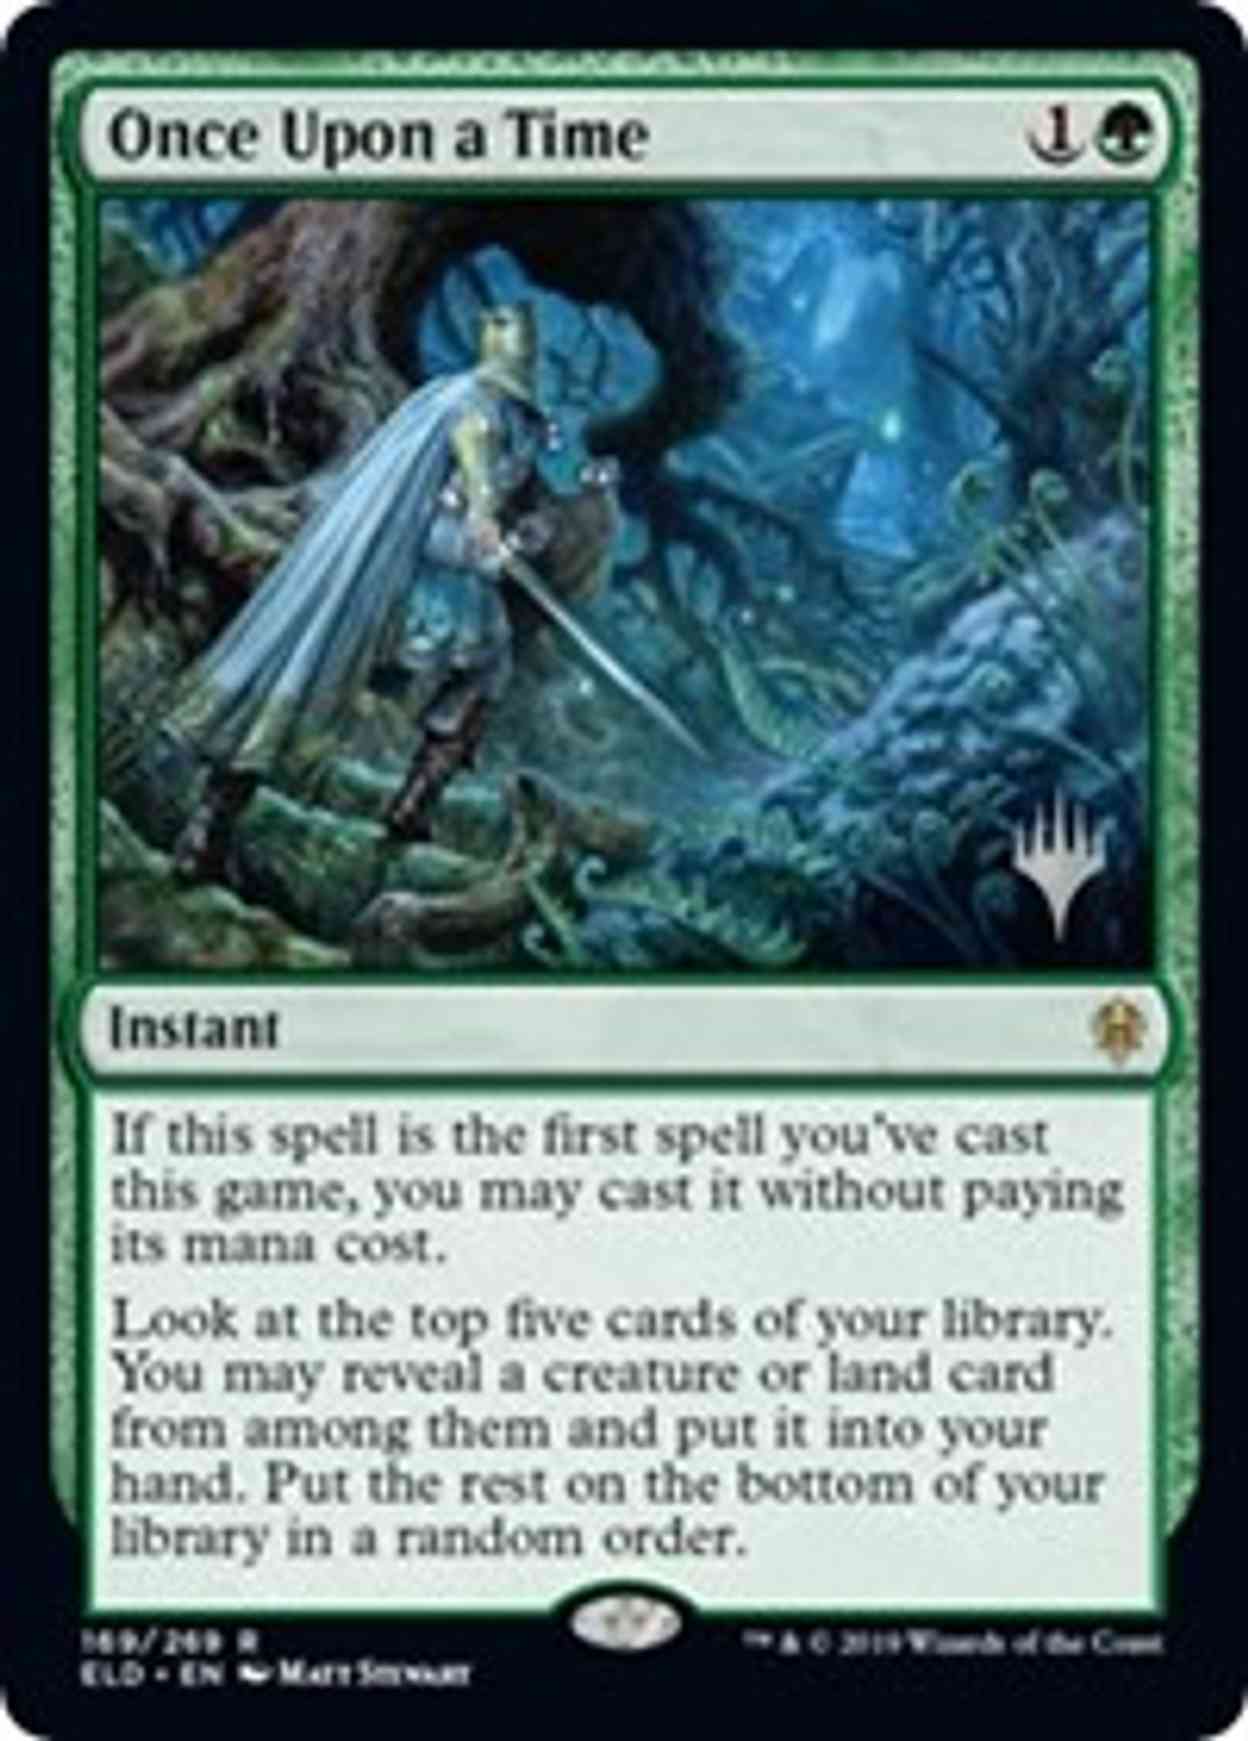 Once Upon a Time magic card front